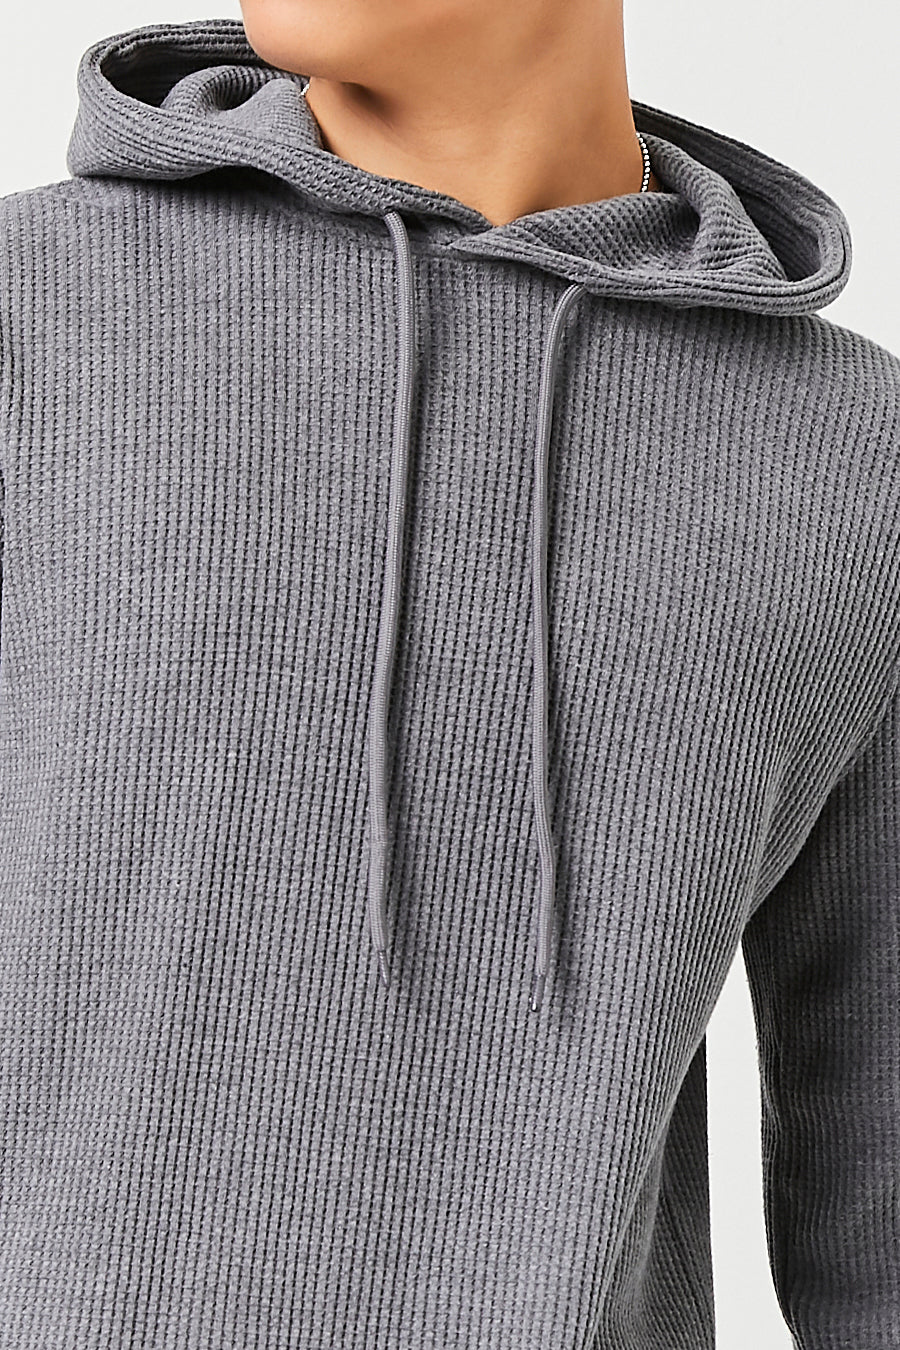 Sweater-Knit Drawstring Hoodie Charcoal